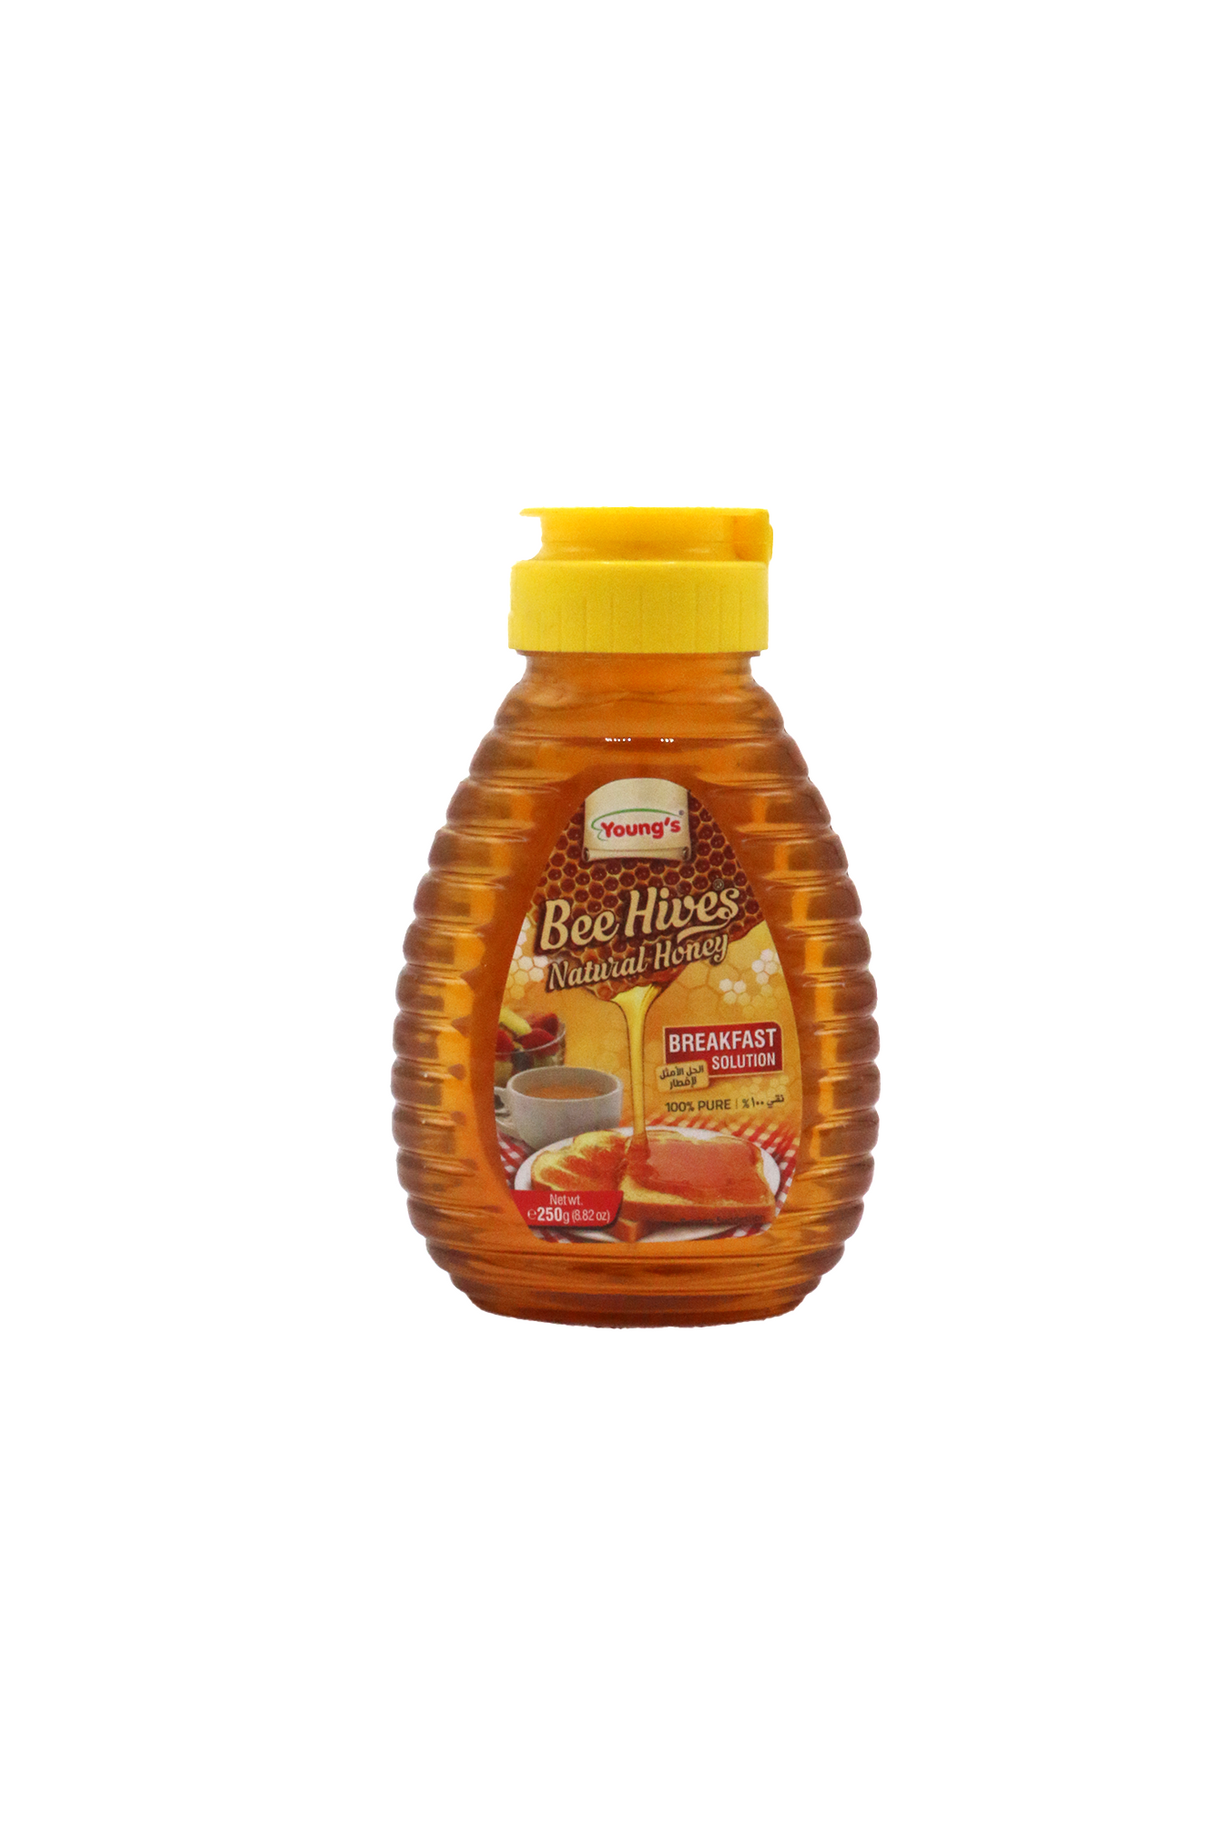 youngs honey bee hives 250g squeez bottle